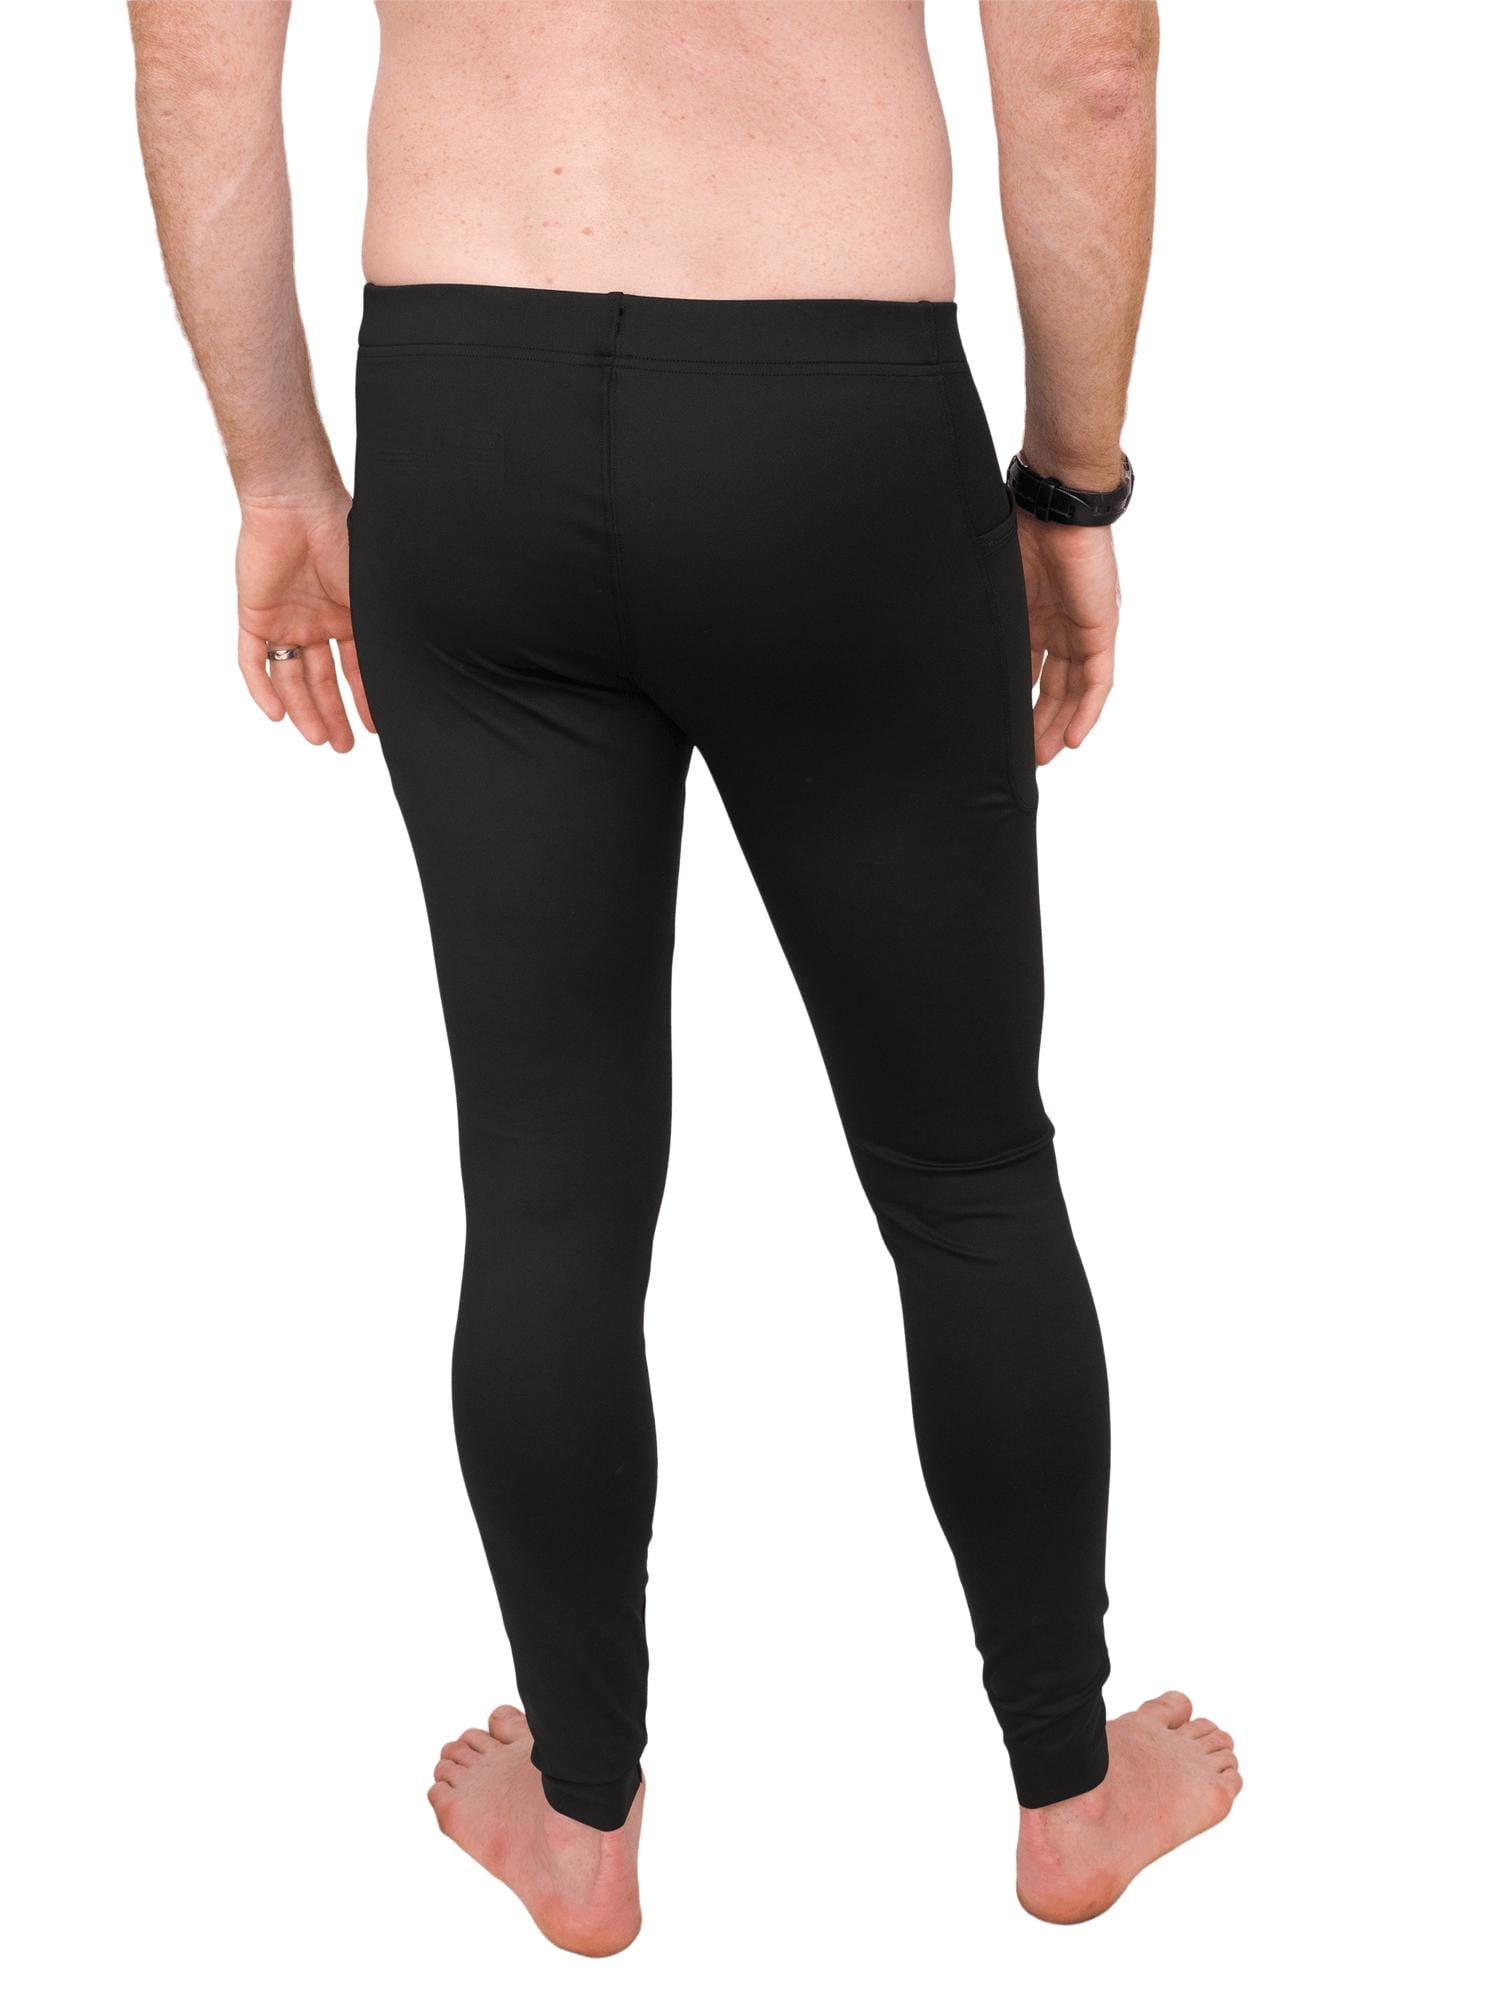 Model: Patrick is the CEO and founder of Waterlust. He is 6'1", 175lbs and wearing a size L legging.